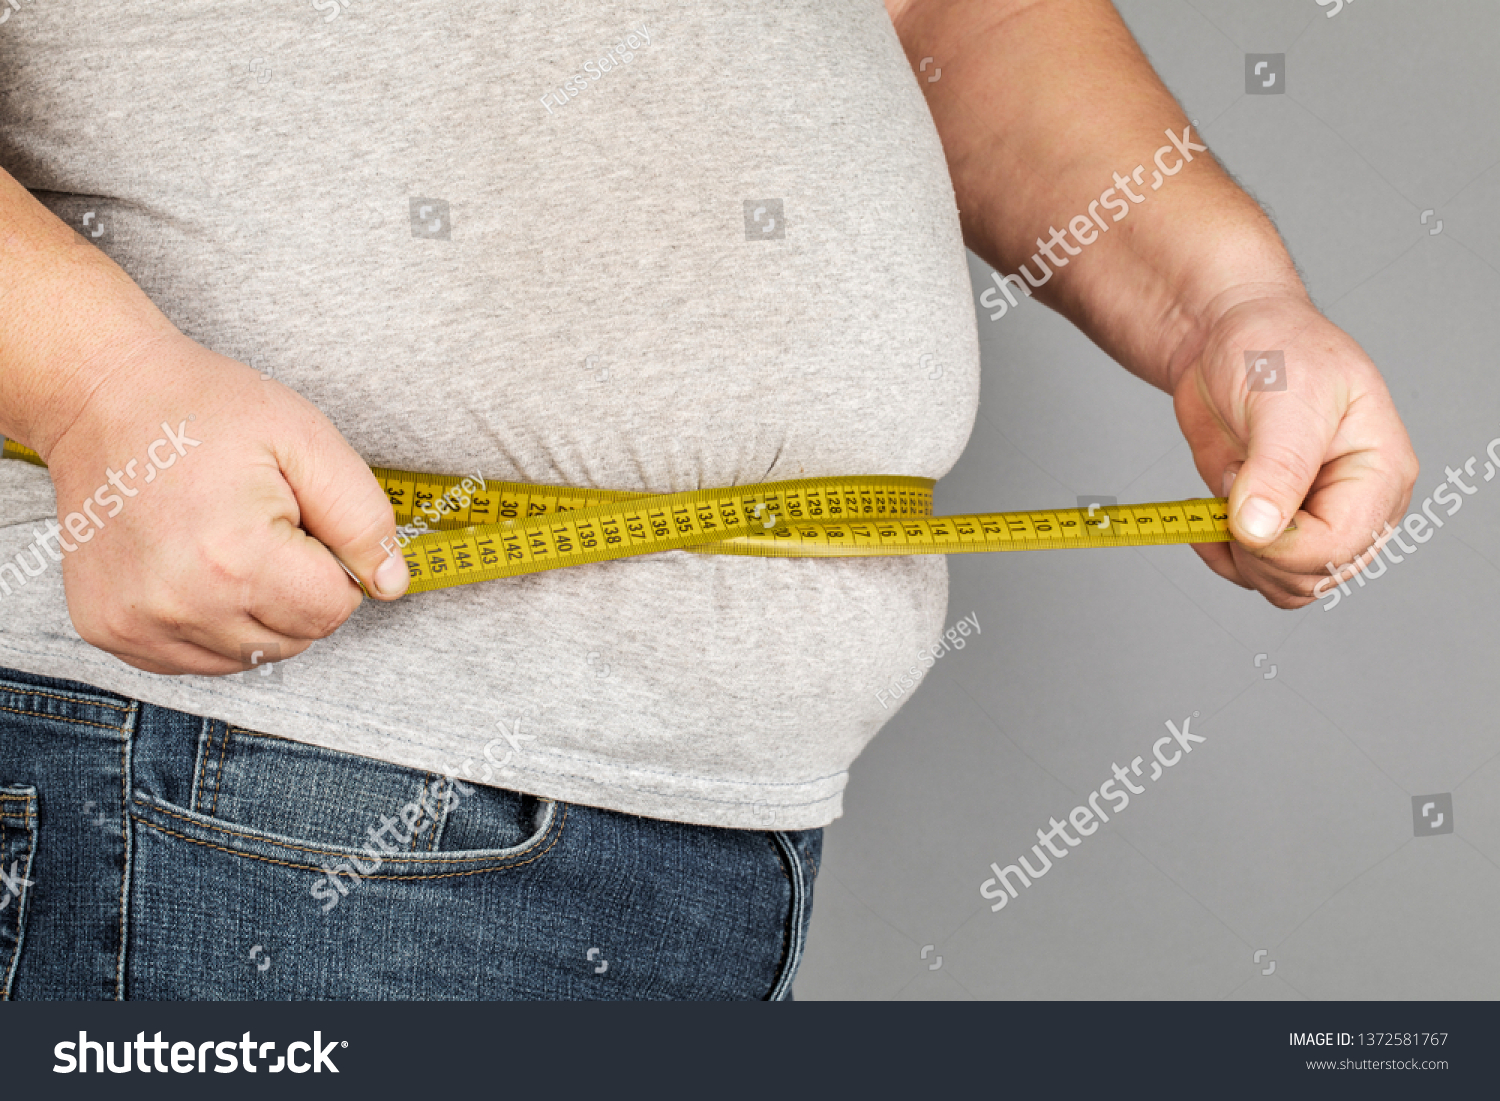 A man measures his fat belly with a measuring tape. on a gray background #1372581767